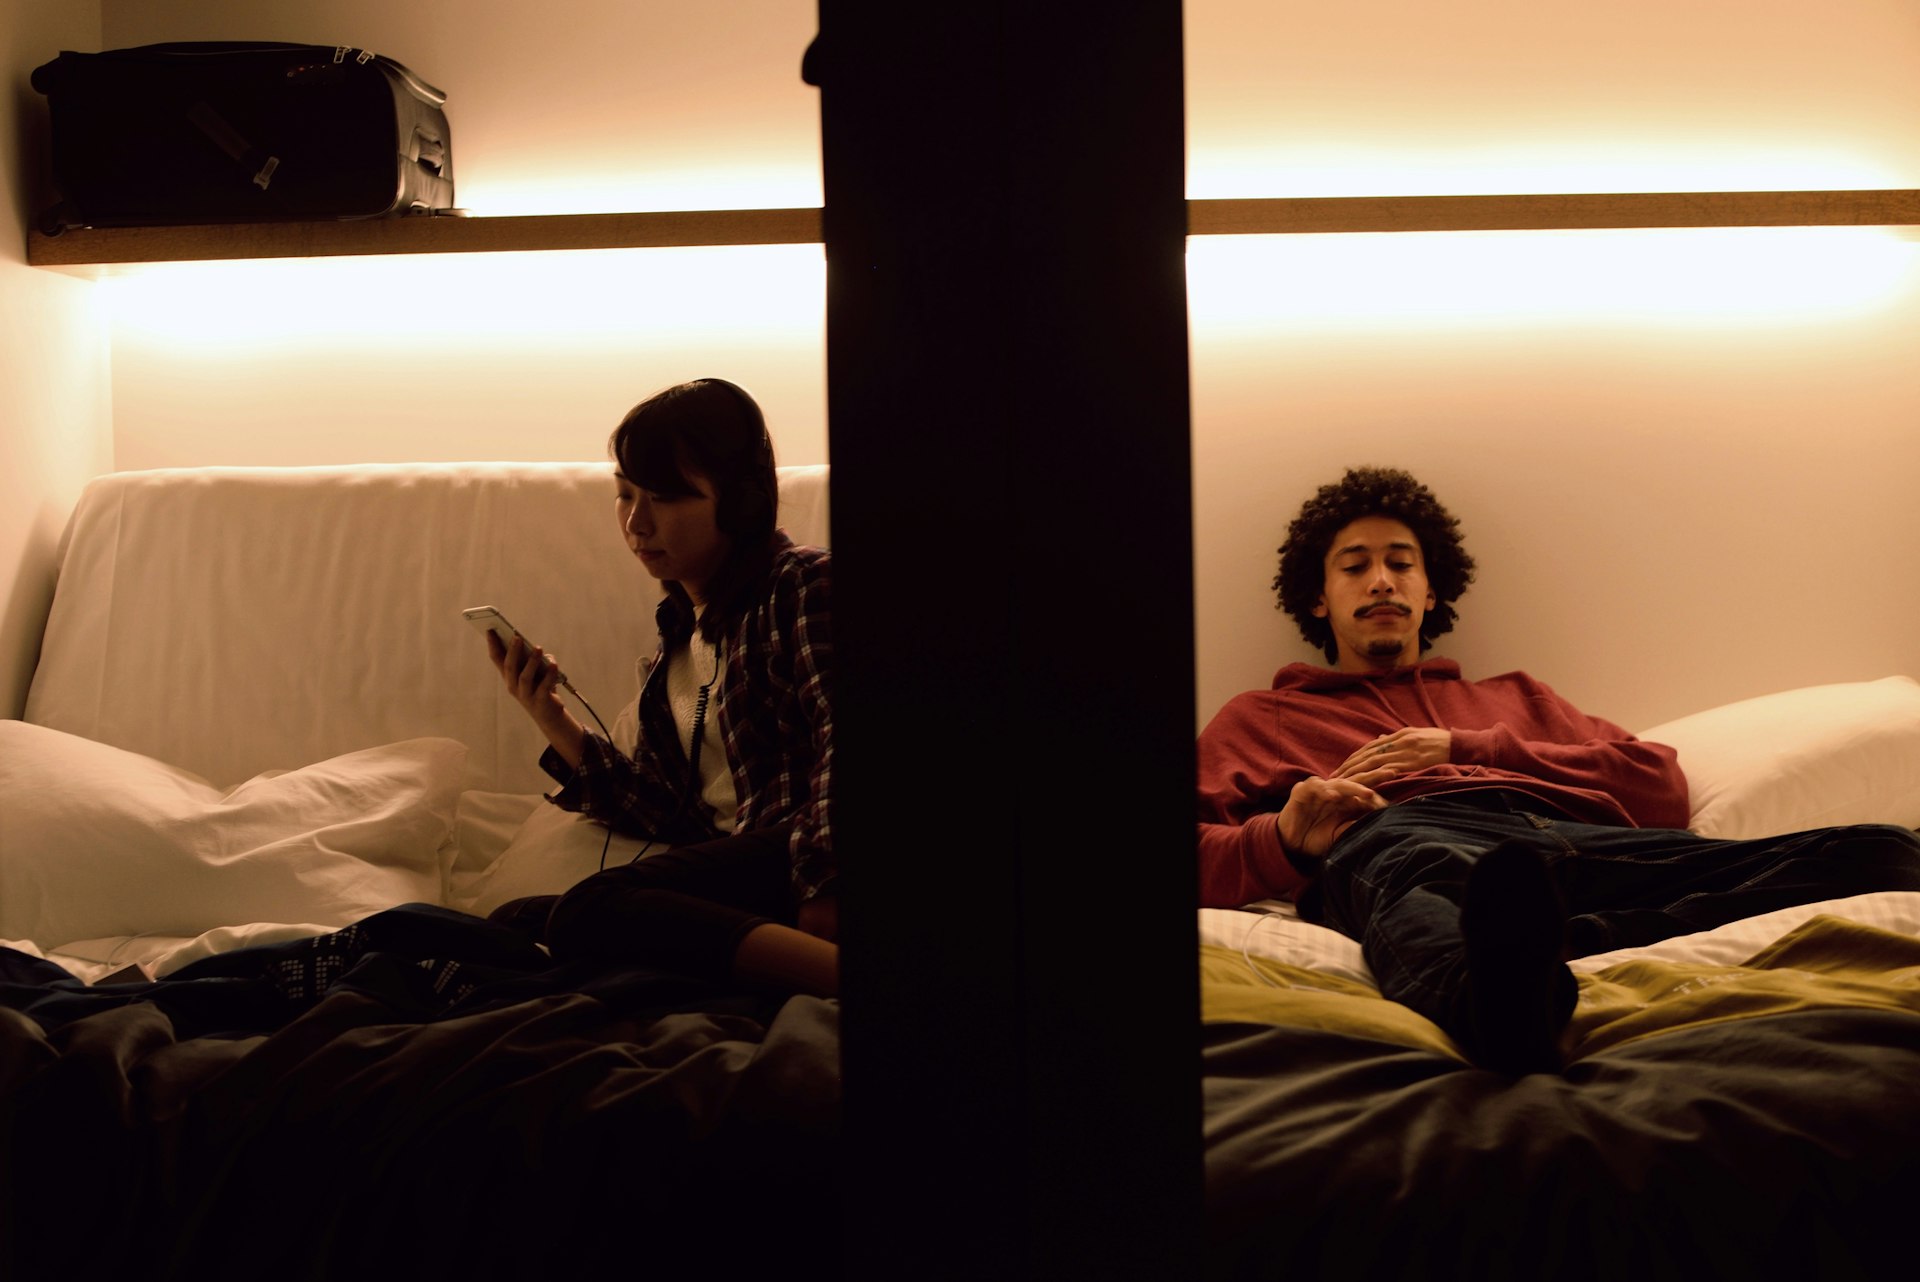 Two young people sitting in adjacent pods at a capsule hotel